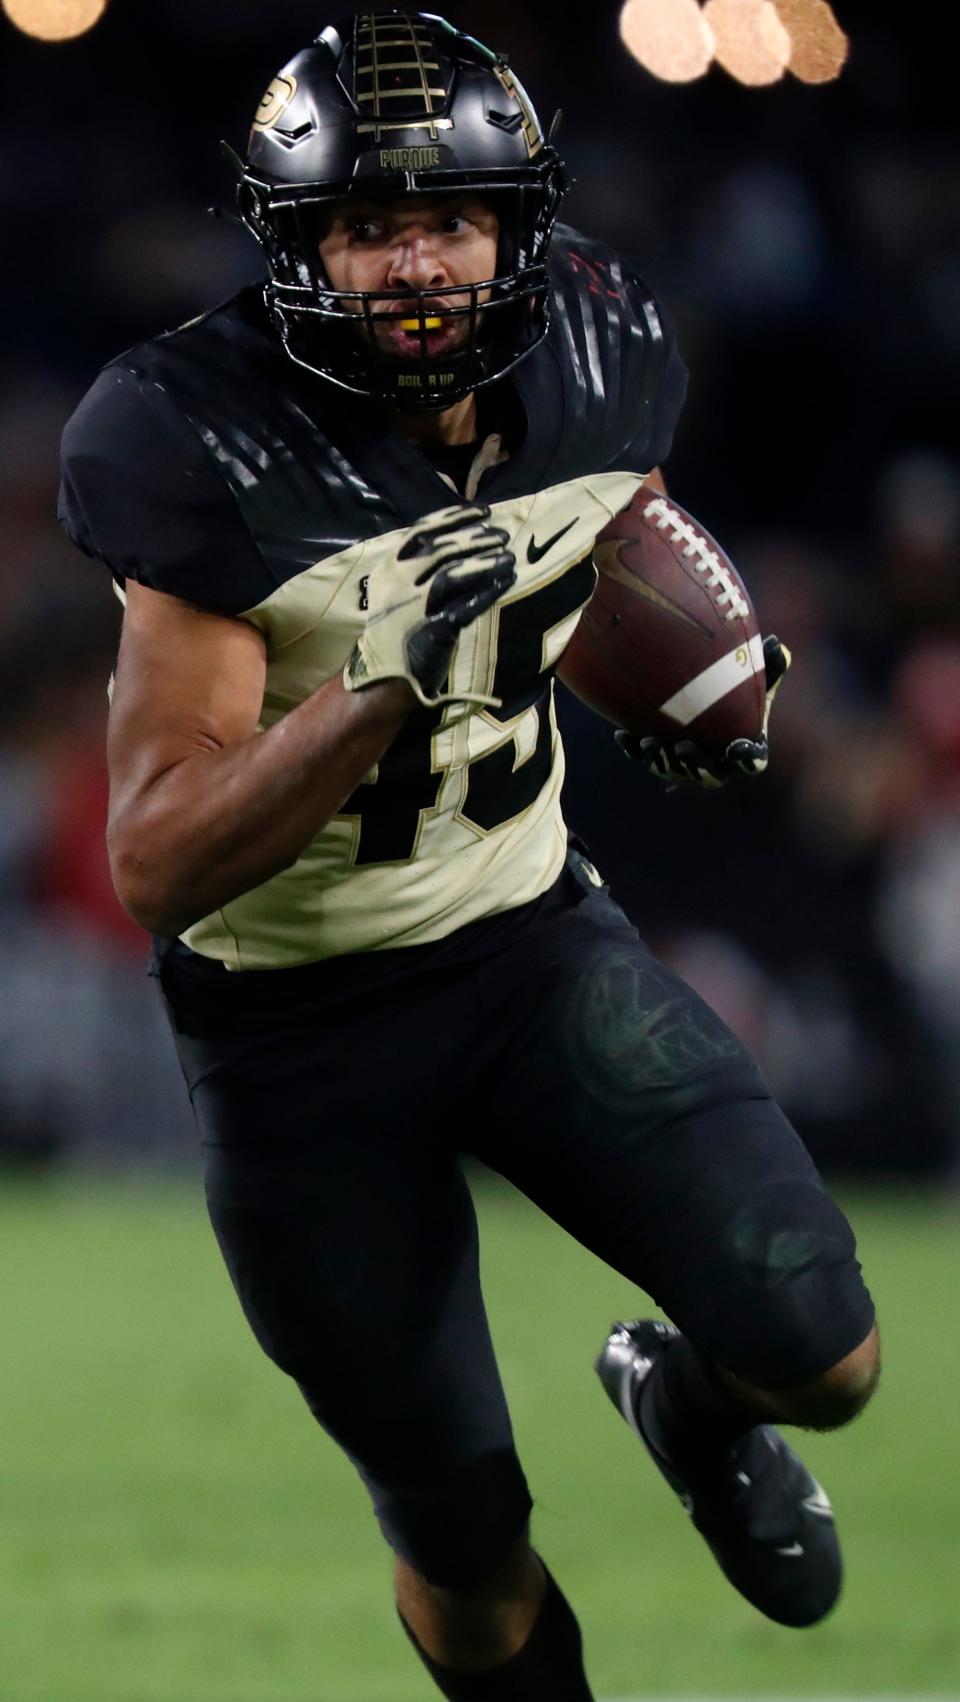 Purdue Boilermakers running back Devin Mockobee (45) rushes the ball during the NCAA football game against the Nebraska Cornhuskers, Saturday, Oct. 15, 2022, at Ross-Ade Stadium in West Lafayette, Ind. Purdue won 43-37.